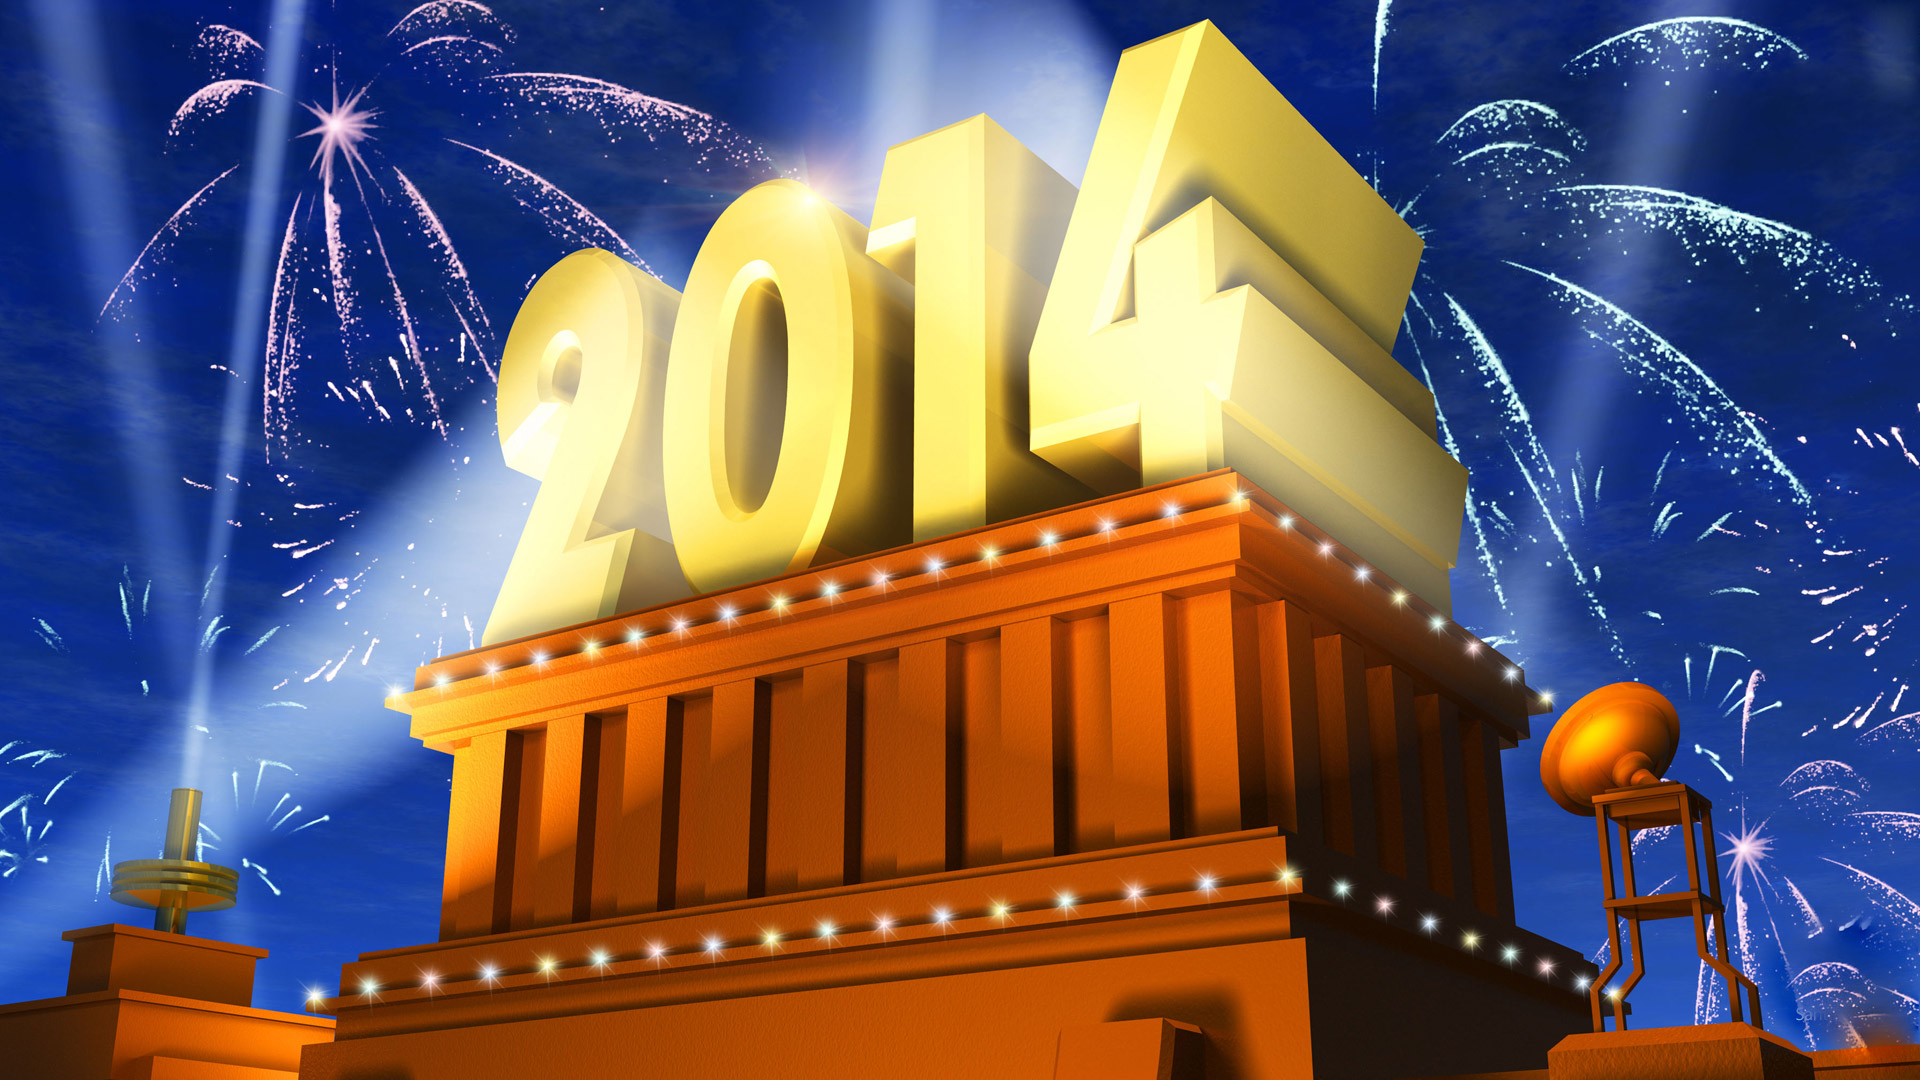 New Year 2014 Backgrounds - Wallpaper, High Definition, High Quality ...
